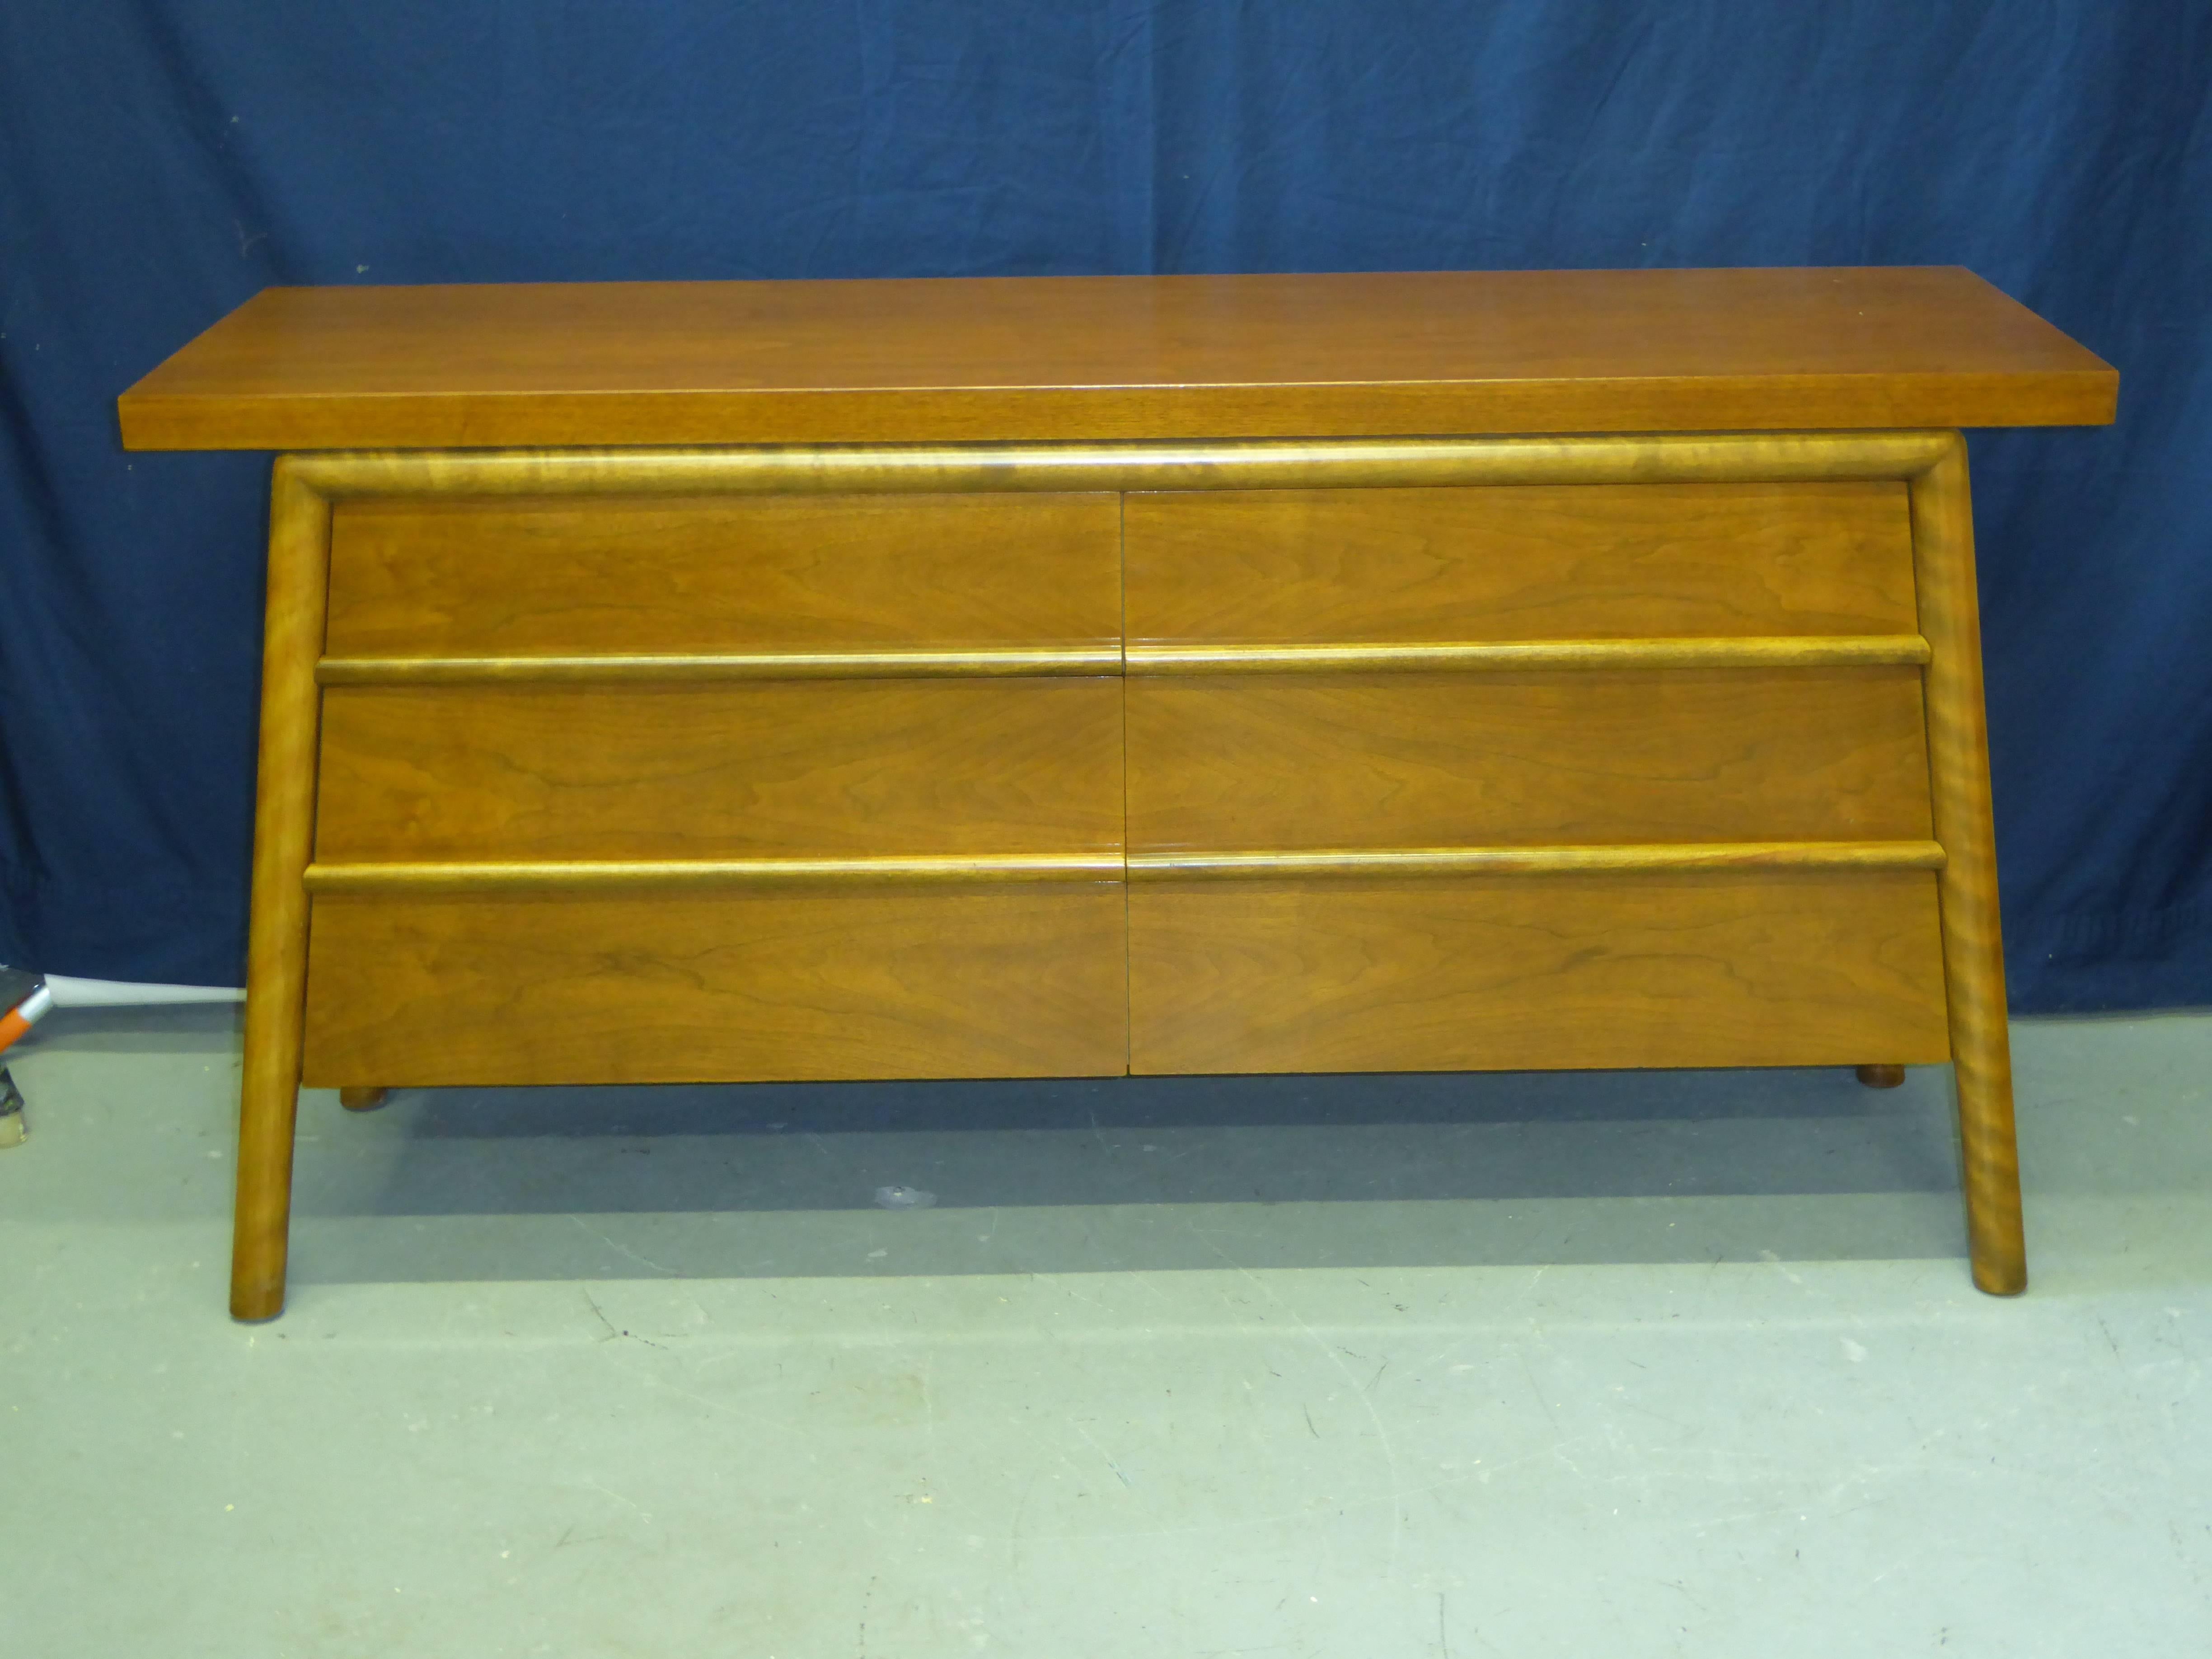 Exquisite bleached walnut credenza by T.H. Robsjohn-Gibbings for Widdicomb dated 1953, featuring six roomy drawers. Unusual A frame shape sides. Excellent original condition with the top repolished. Beautiful walnut figuring. Retains Widdicomb